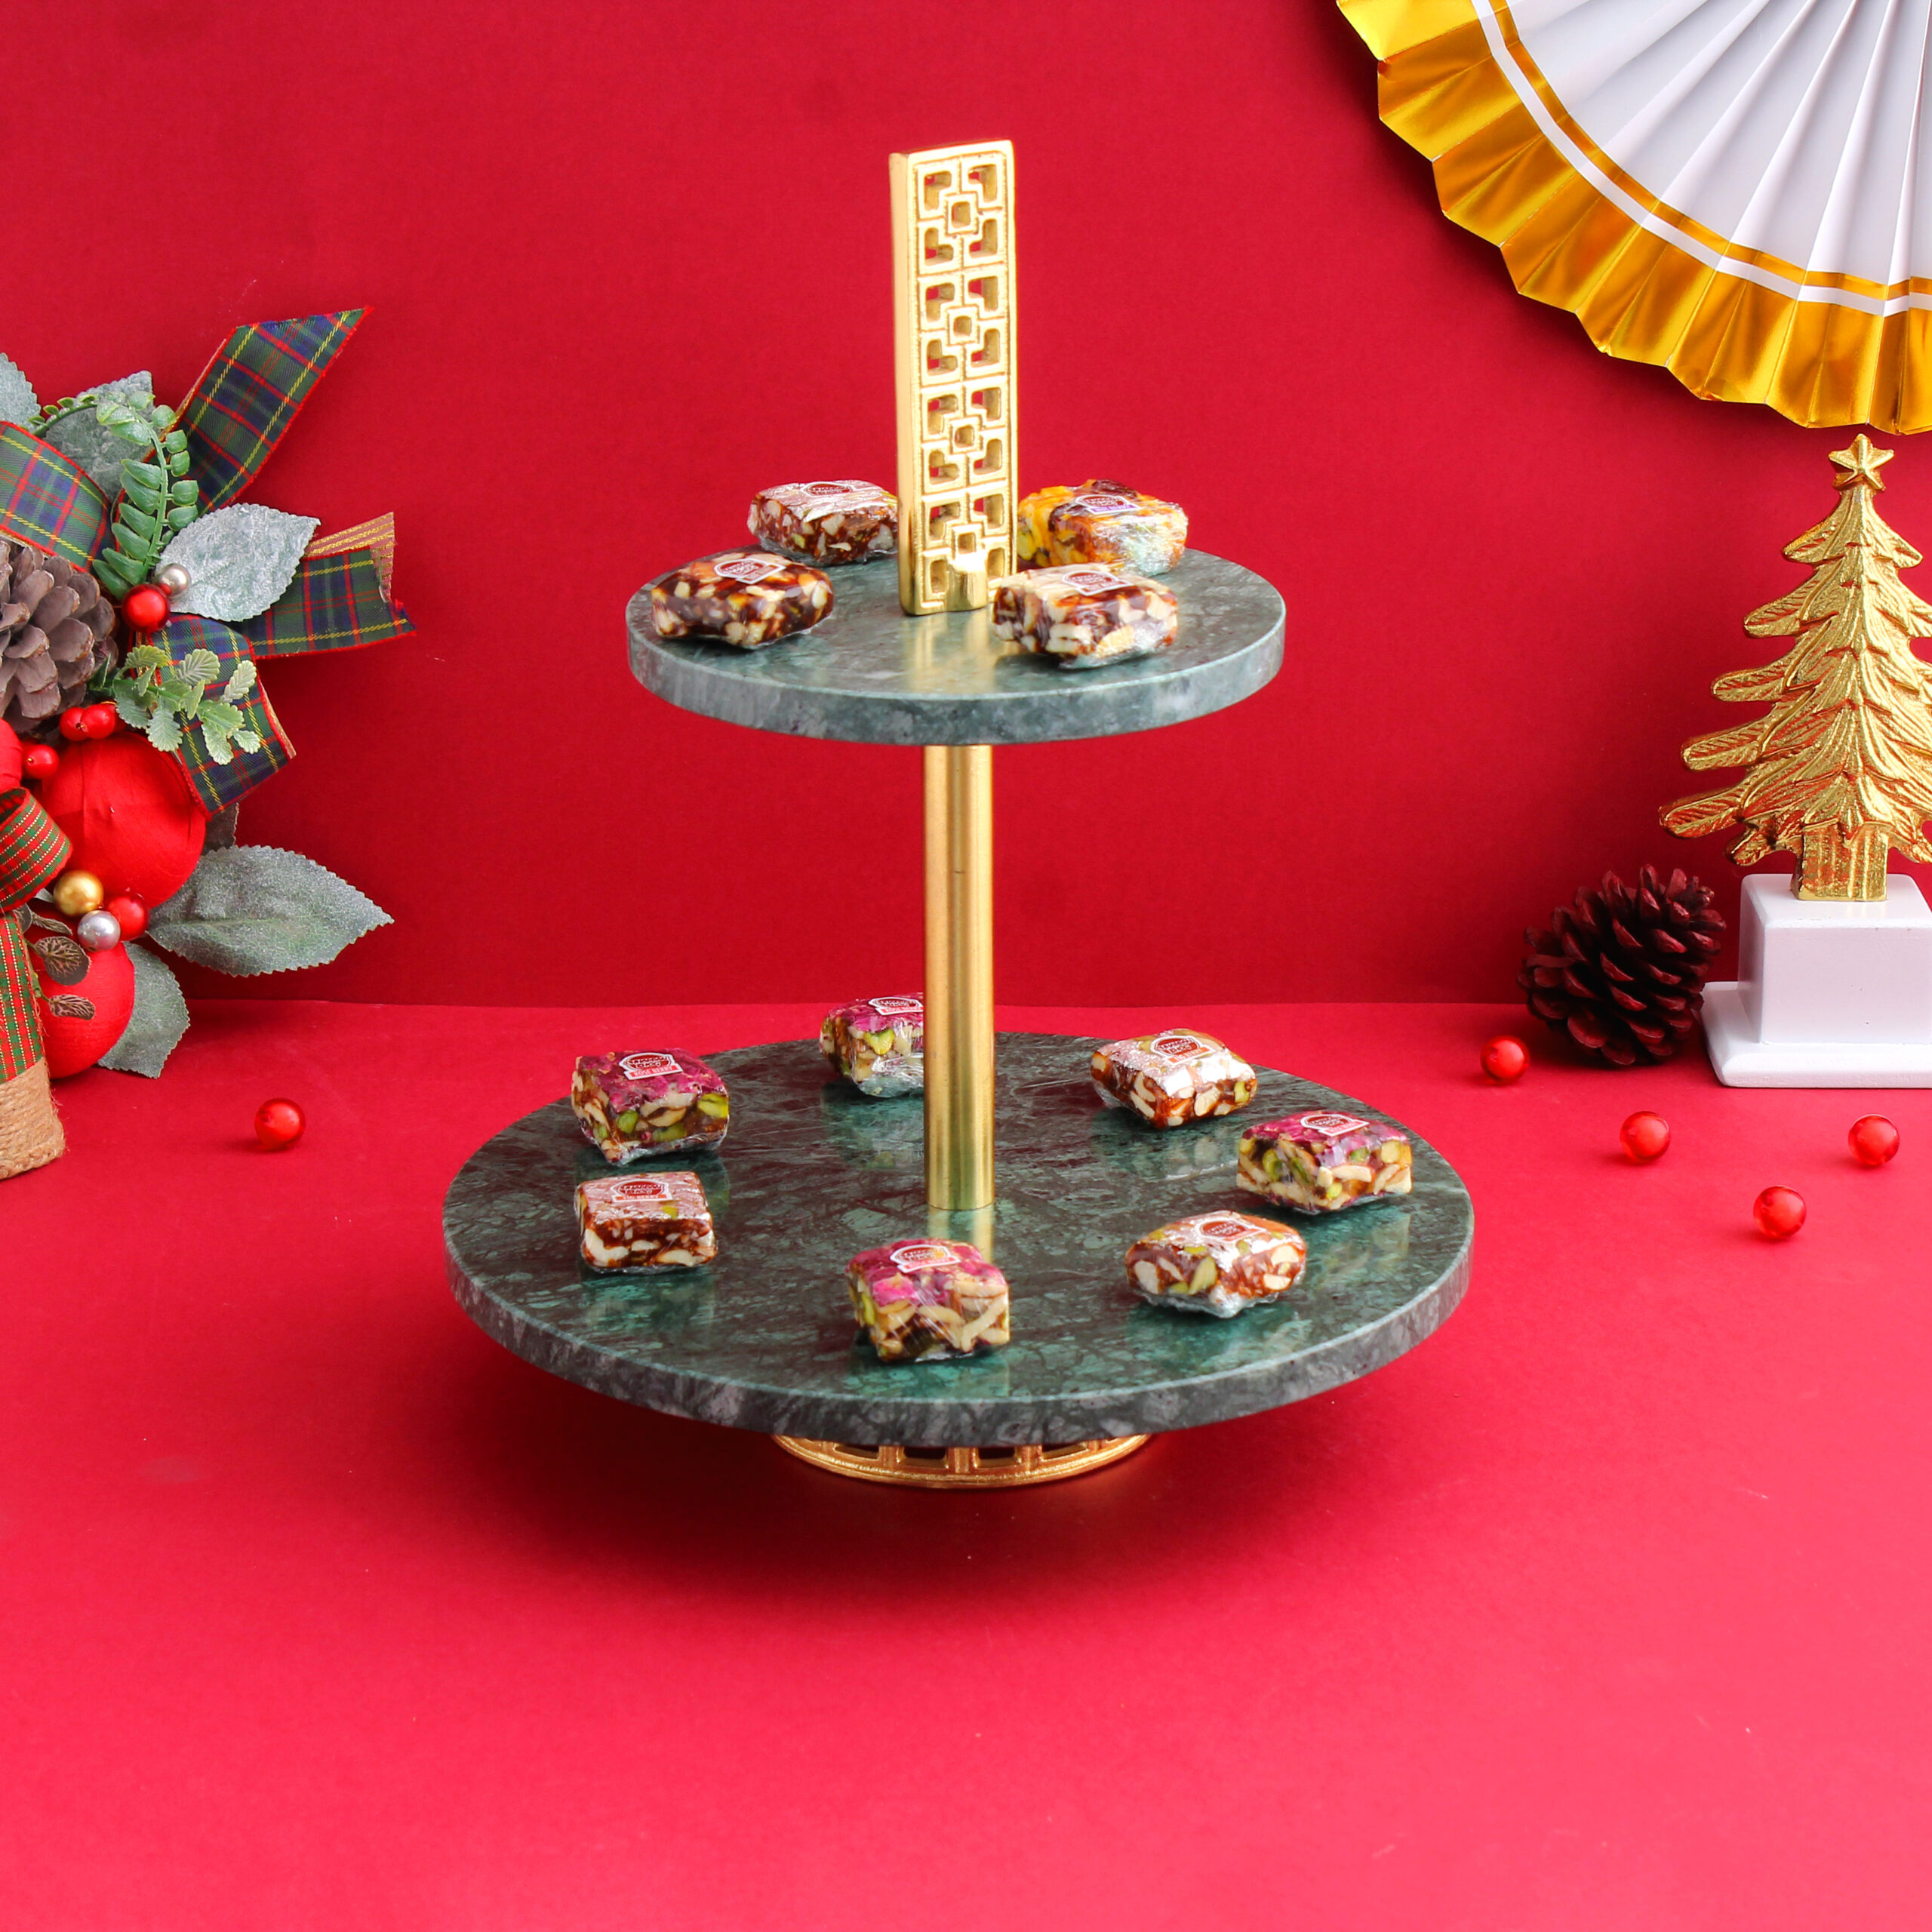 How to make a vintage cake stand | Craft | The Guardian-sonthuy.vn